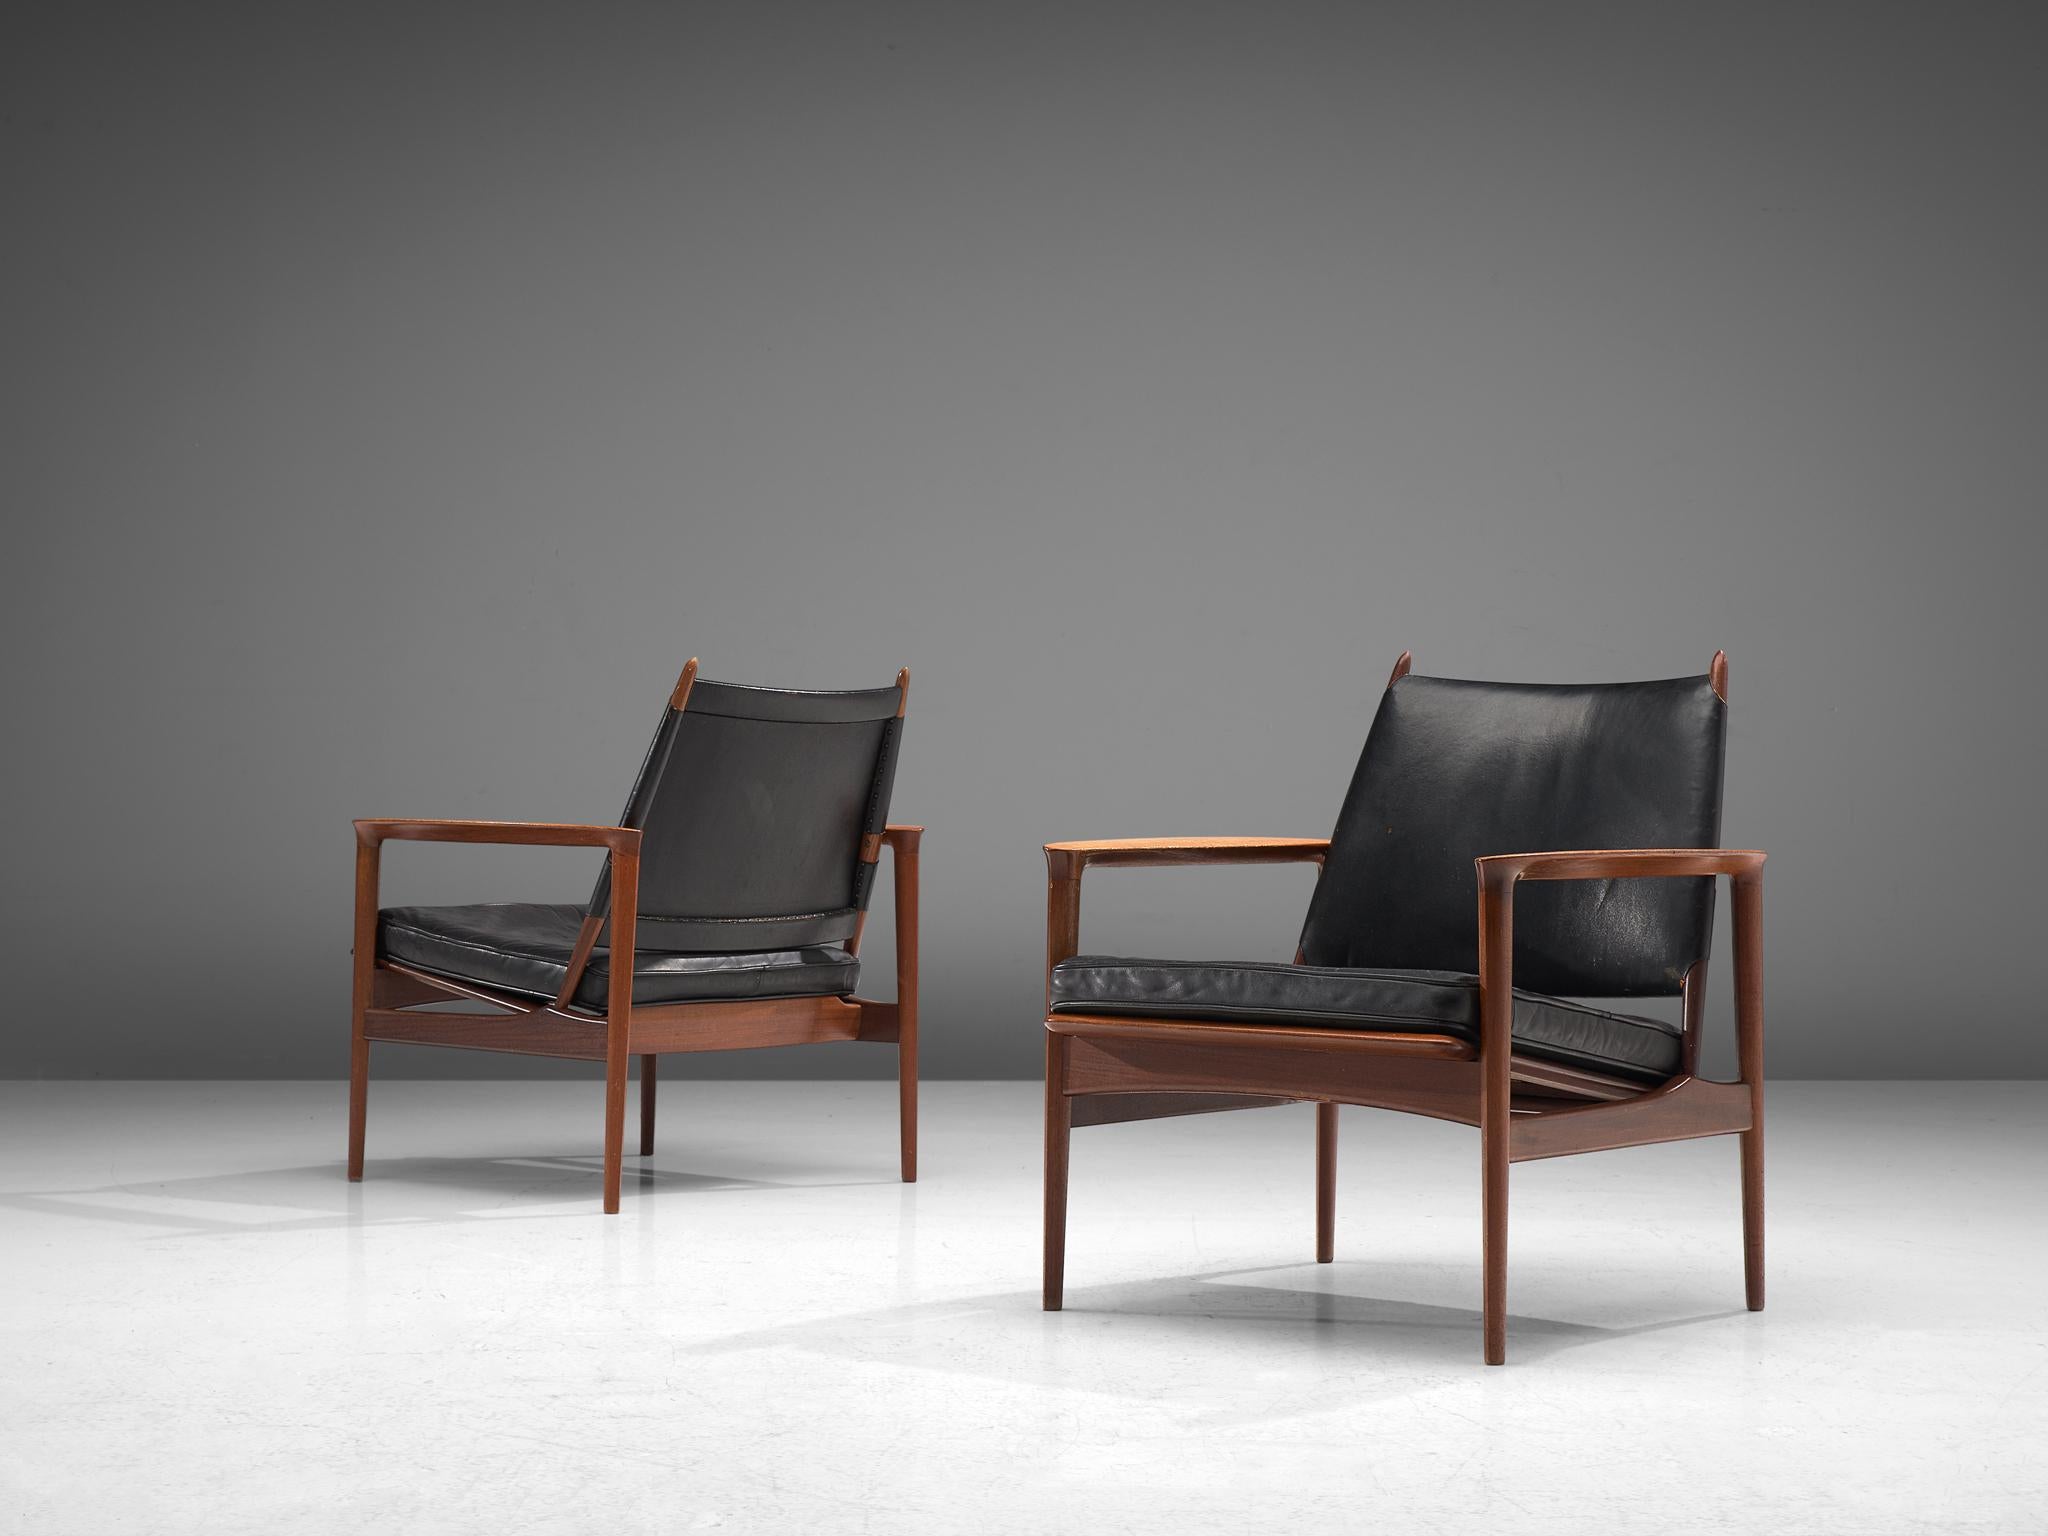 Torbjørn Afdal pair of armchairs in teak and black leather, Norway, 1960s

These rare armchairs by Torbjørn Afdal show outstanding craftsmanship. The woodwork is elegant, showing nice details and wood joints. Due to the openness of the frame, the